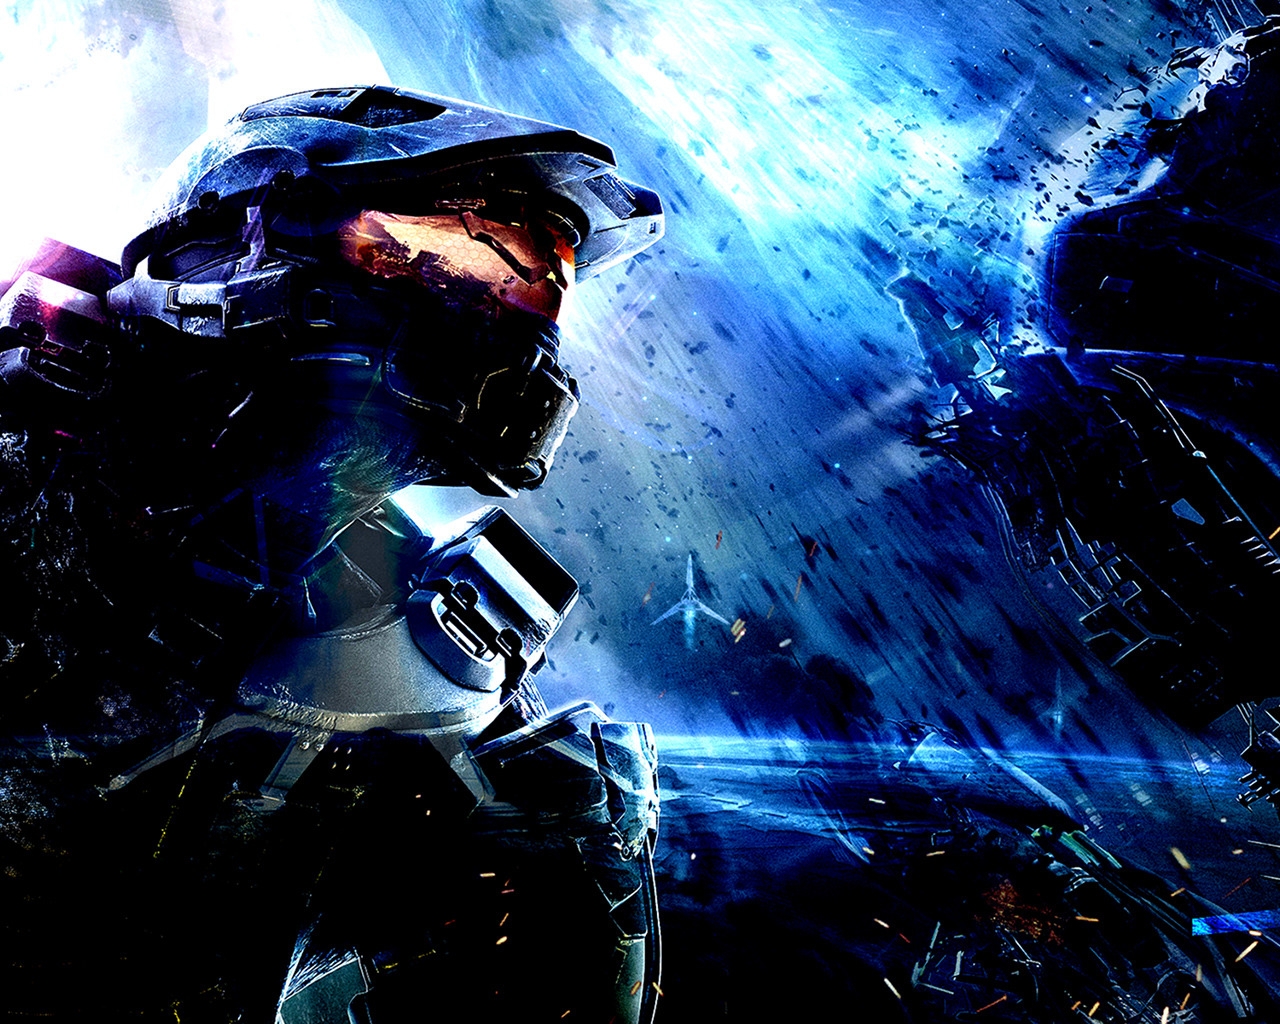 Halo 4 Complex for 1280 x 1024 resolution